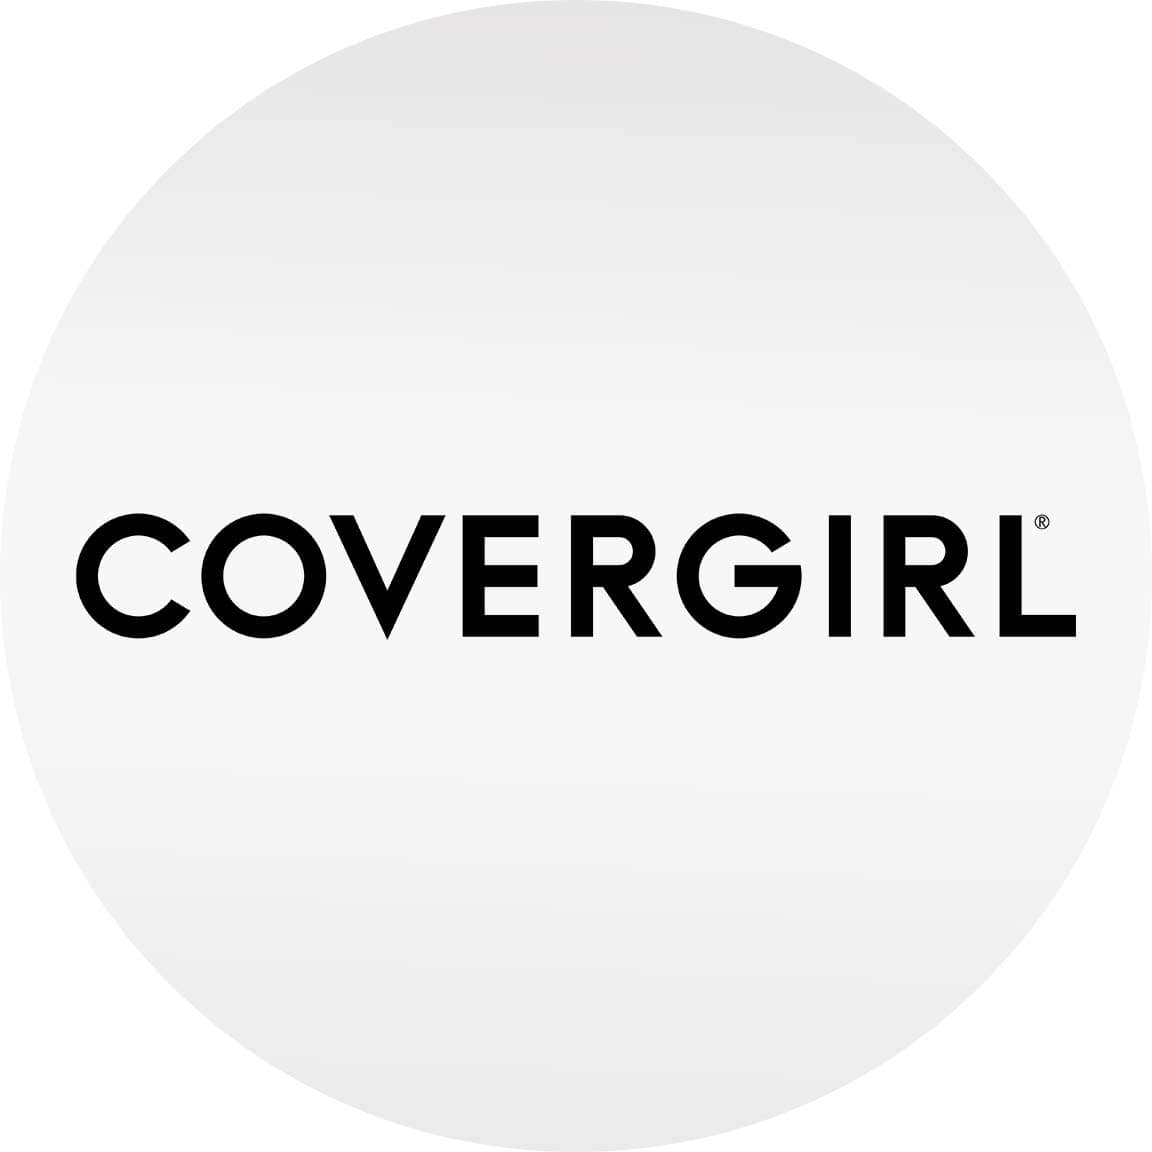 Shop for CoverGirl® brand beauty products